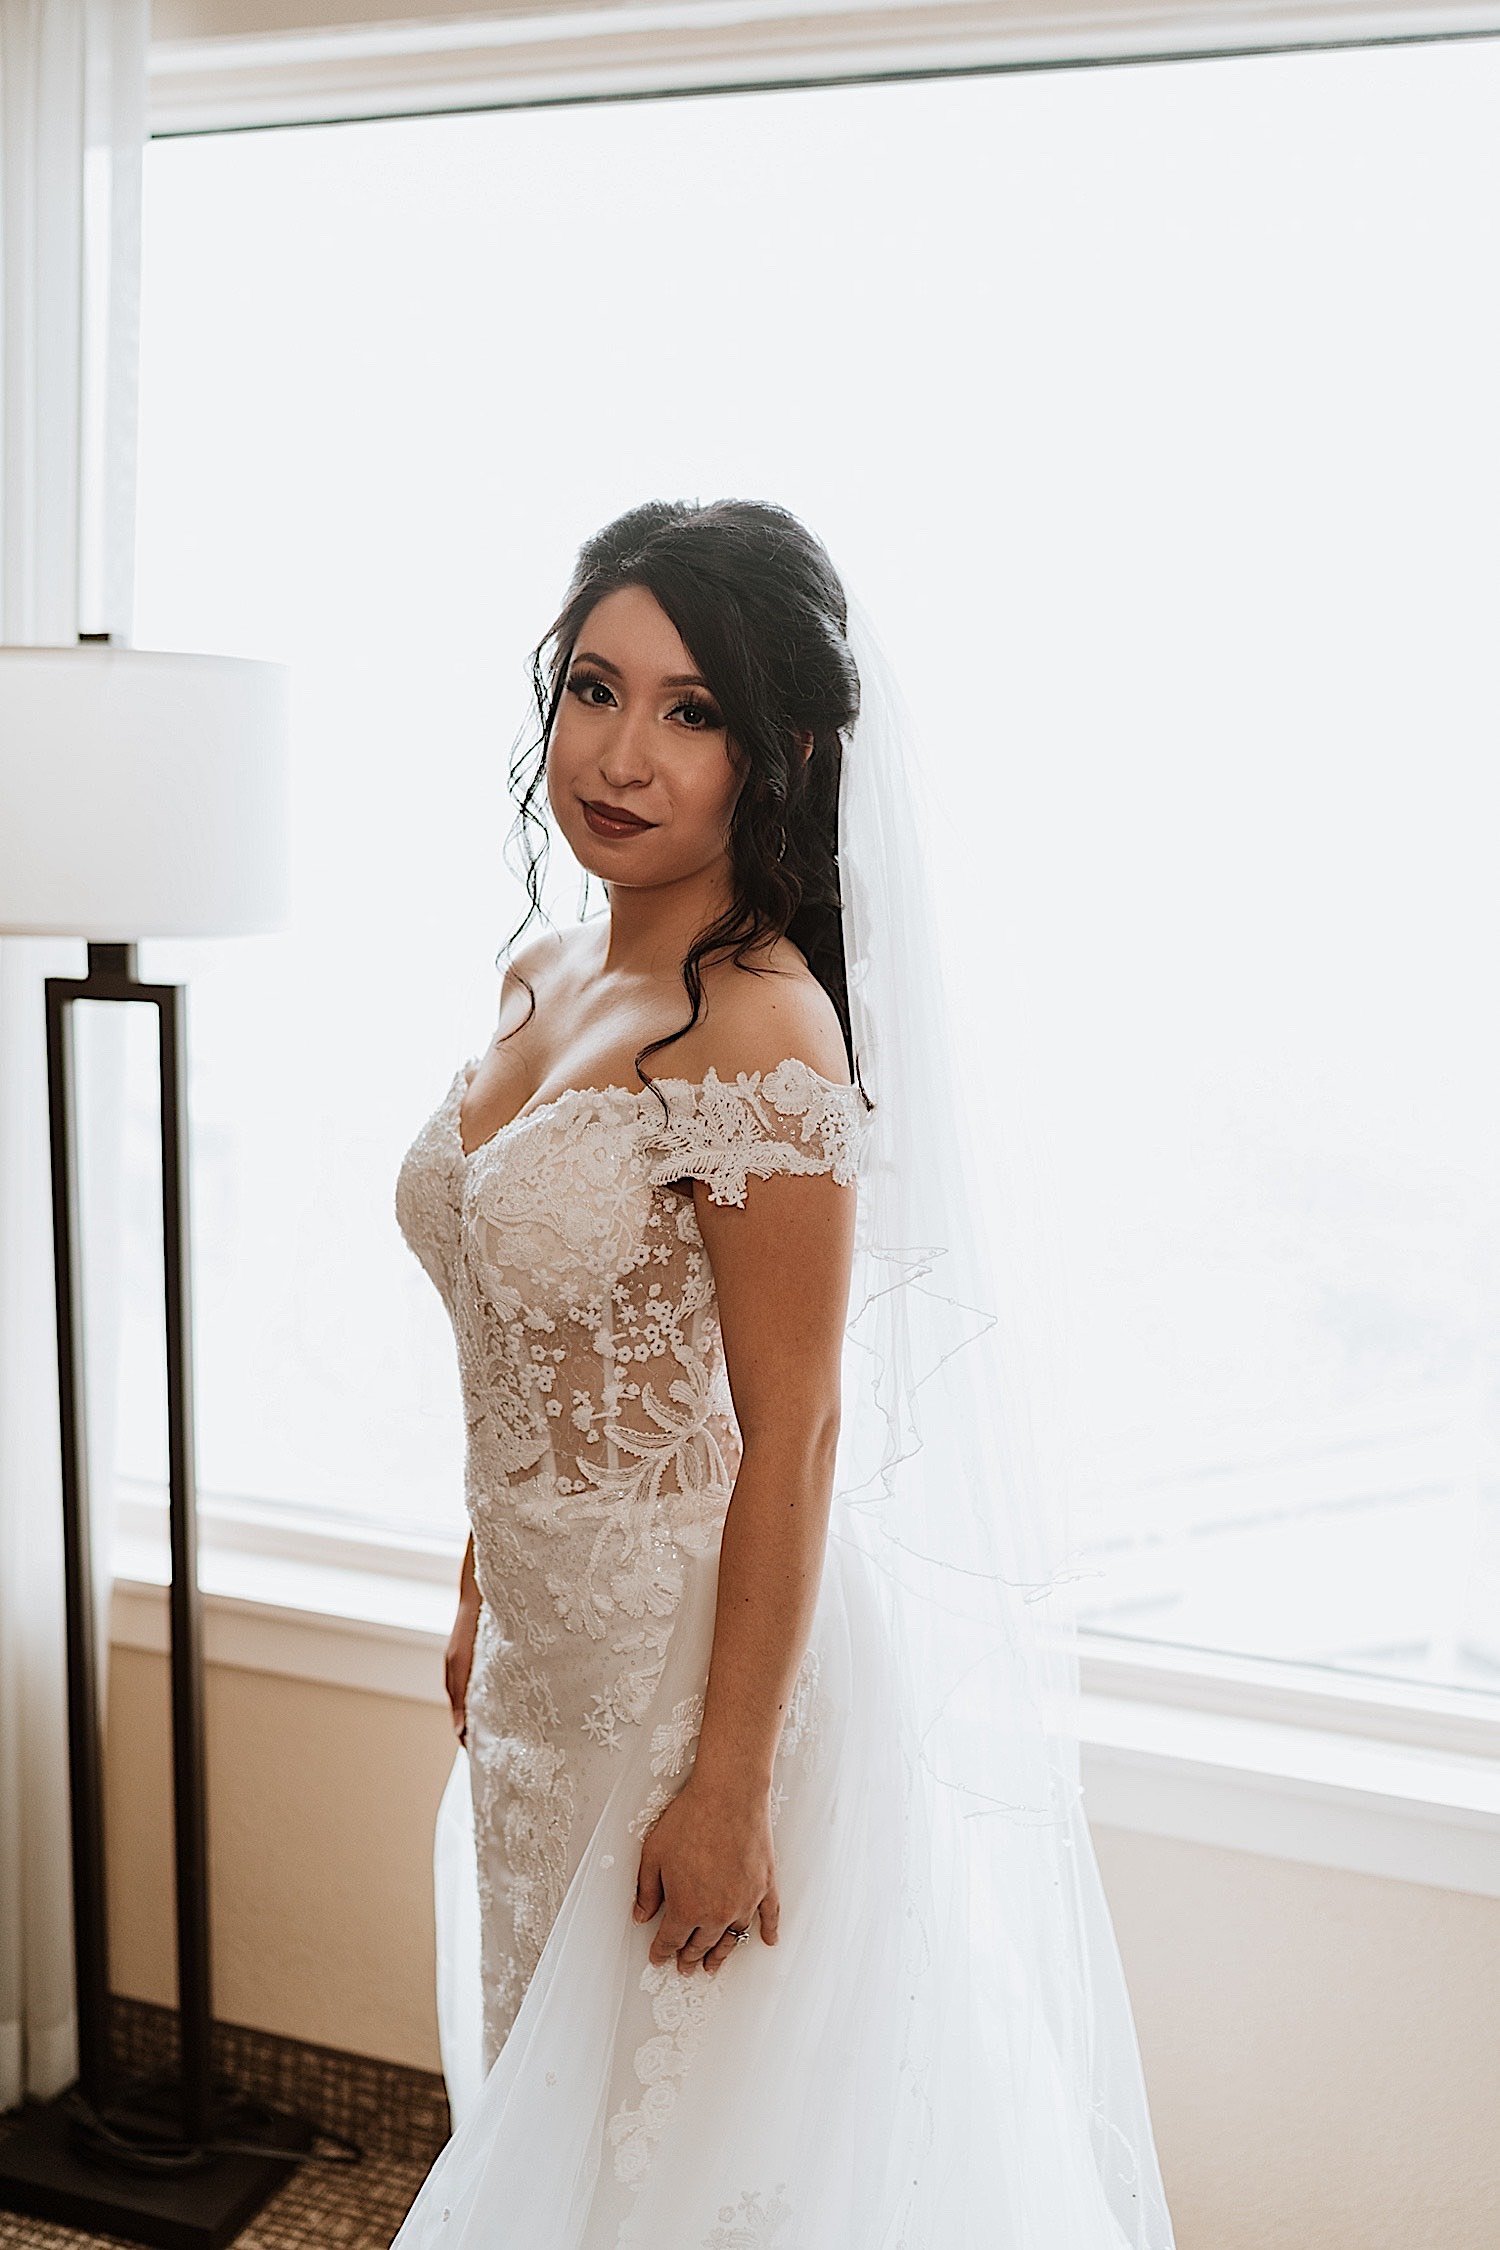 Bride poses in her wedding dress and looks at the camera in front of a window